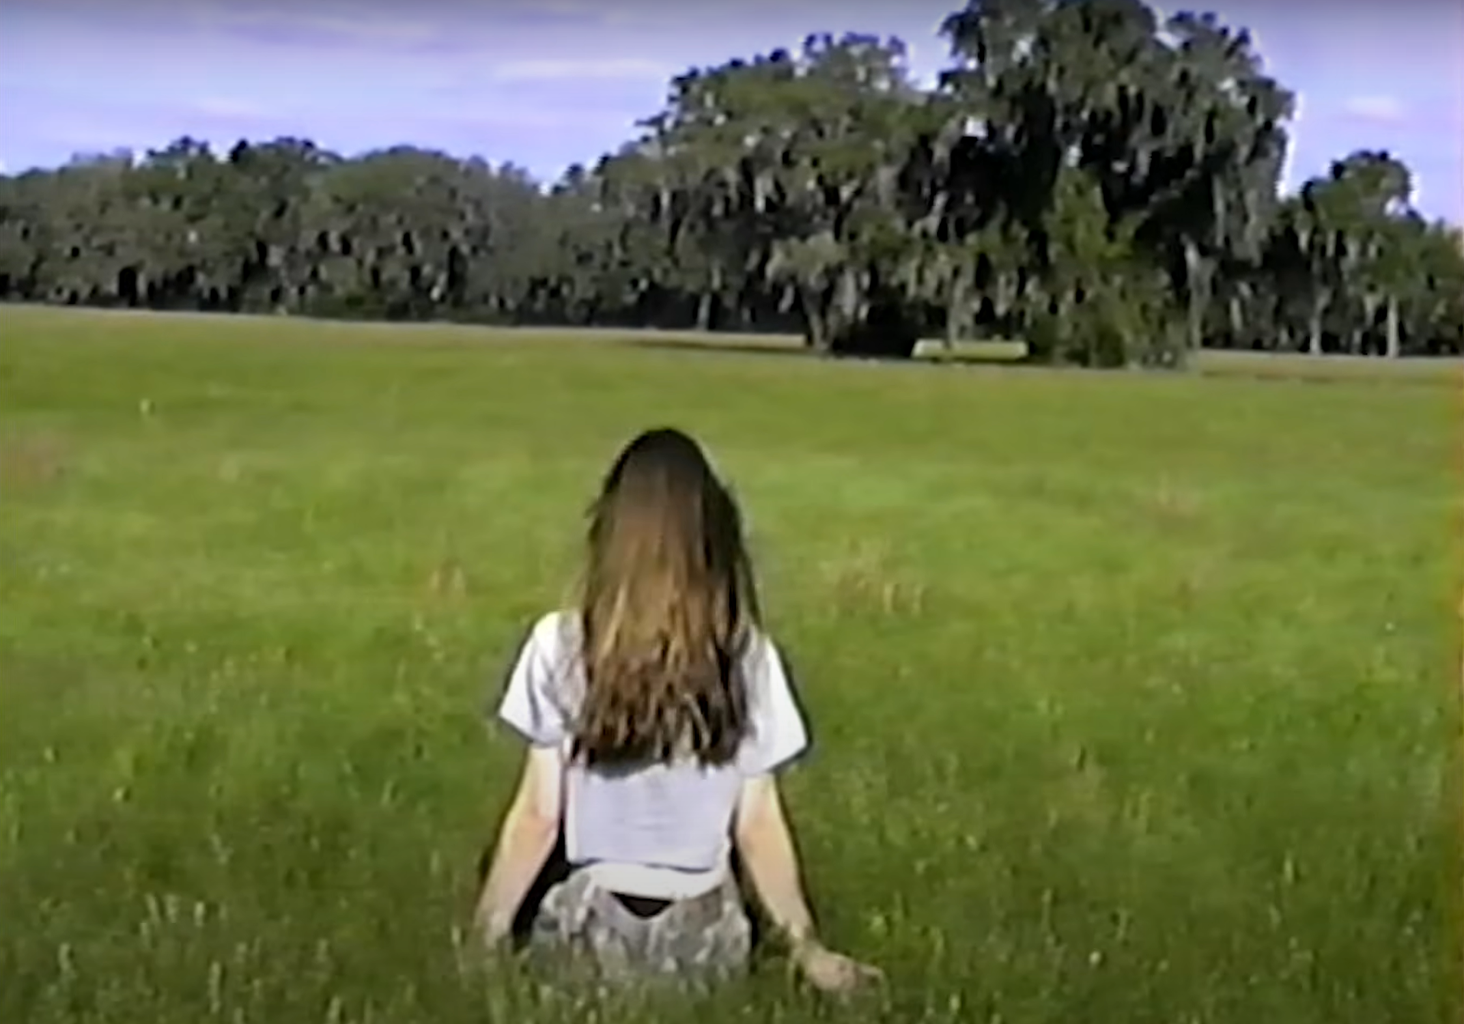 Ethel Cain (young white woman) sits facing away from the camera in a field of green grass. There are trees in the horizon. Her long brown hair flows down her back.